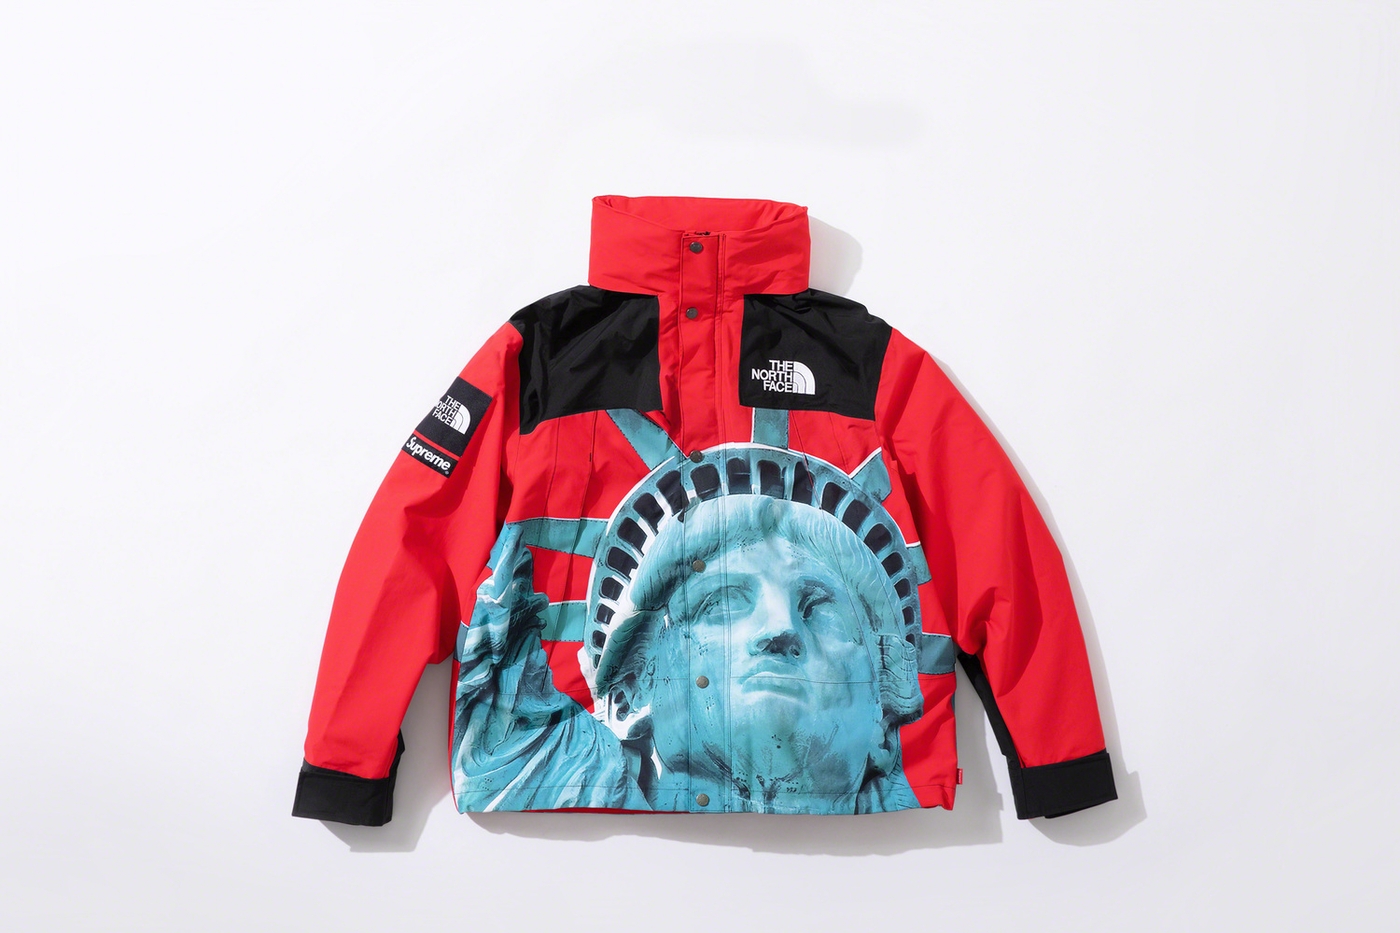 Statue of Liberty Mountain Jacket with packable hood. (17/29)